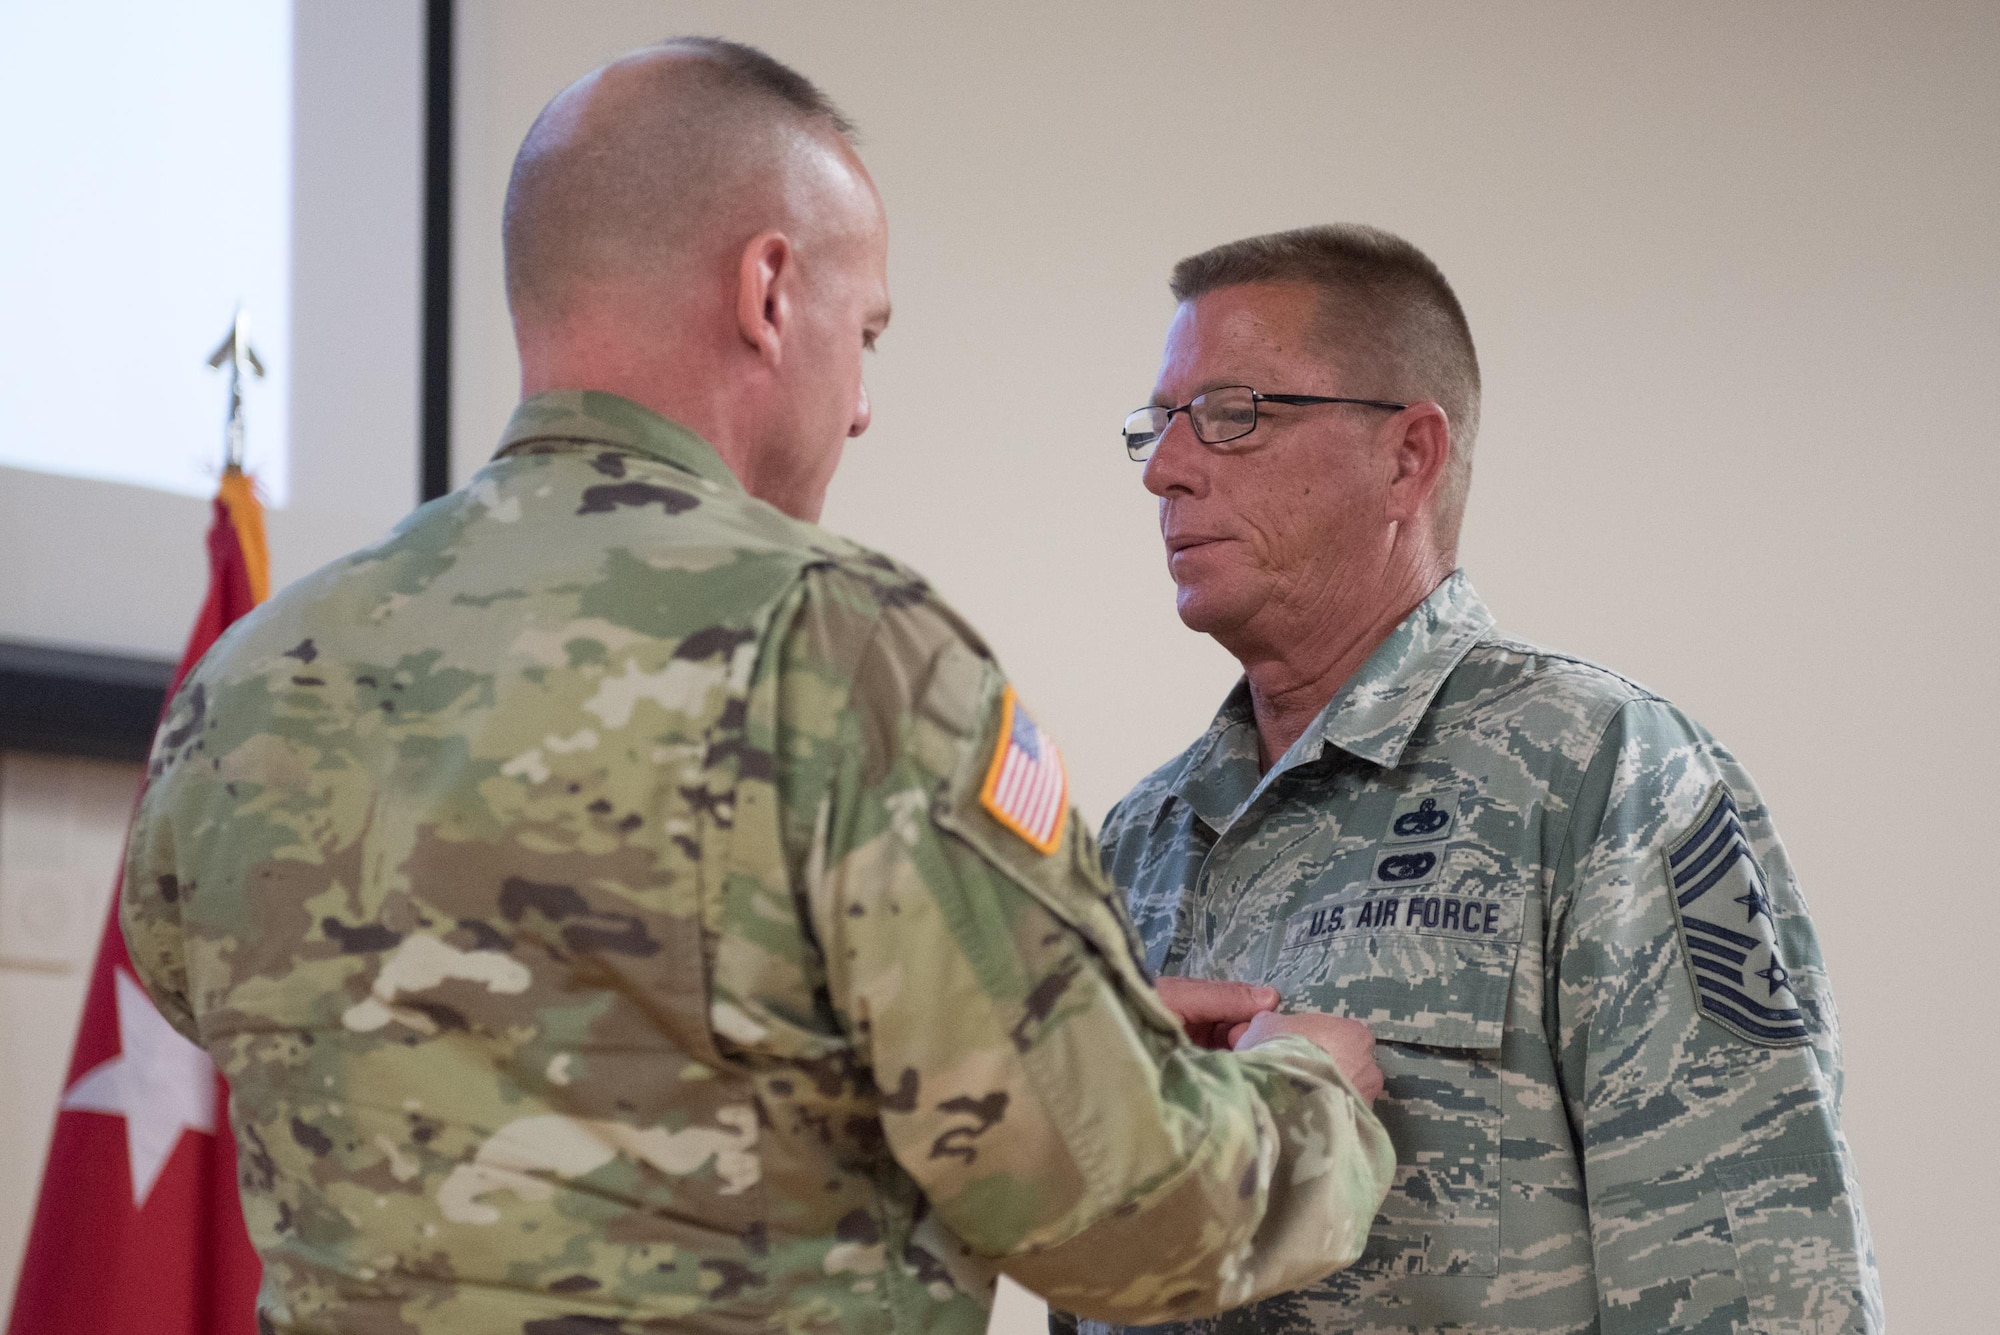 Army Maj. Gen. Stephen Hogan (left), the adjutant general for Kentucky, pins the Legion of Merit onto Chief Master Sgt. Jeffrey Moore (right), the outgoing state command chief master sergeant, during Moore’s retirement ceremony at the Kentucky Air National Guard base in Louisville, Ky., on May 20, 2017. Moore is retiring after 35 years of service to the Kentucky Air National Guard and United States Air Force. (U.S. Air National Guard photo by Staff Sgt. Joshua Horton)